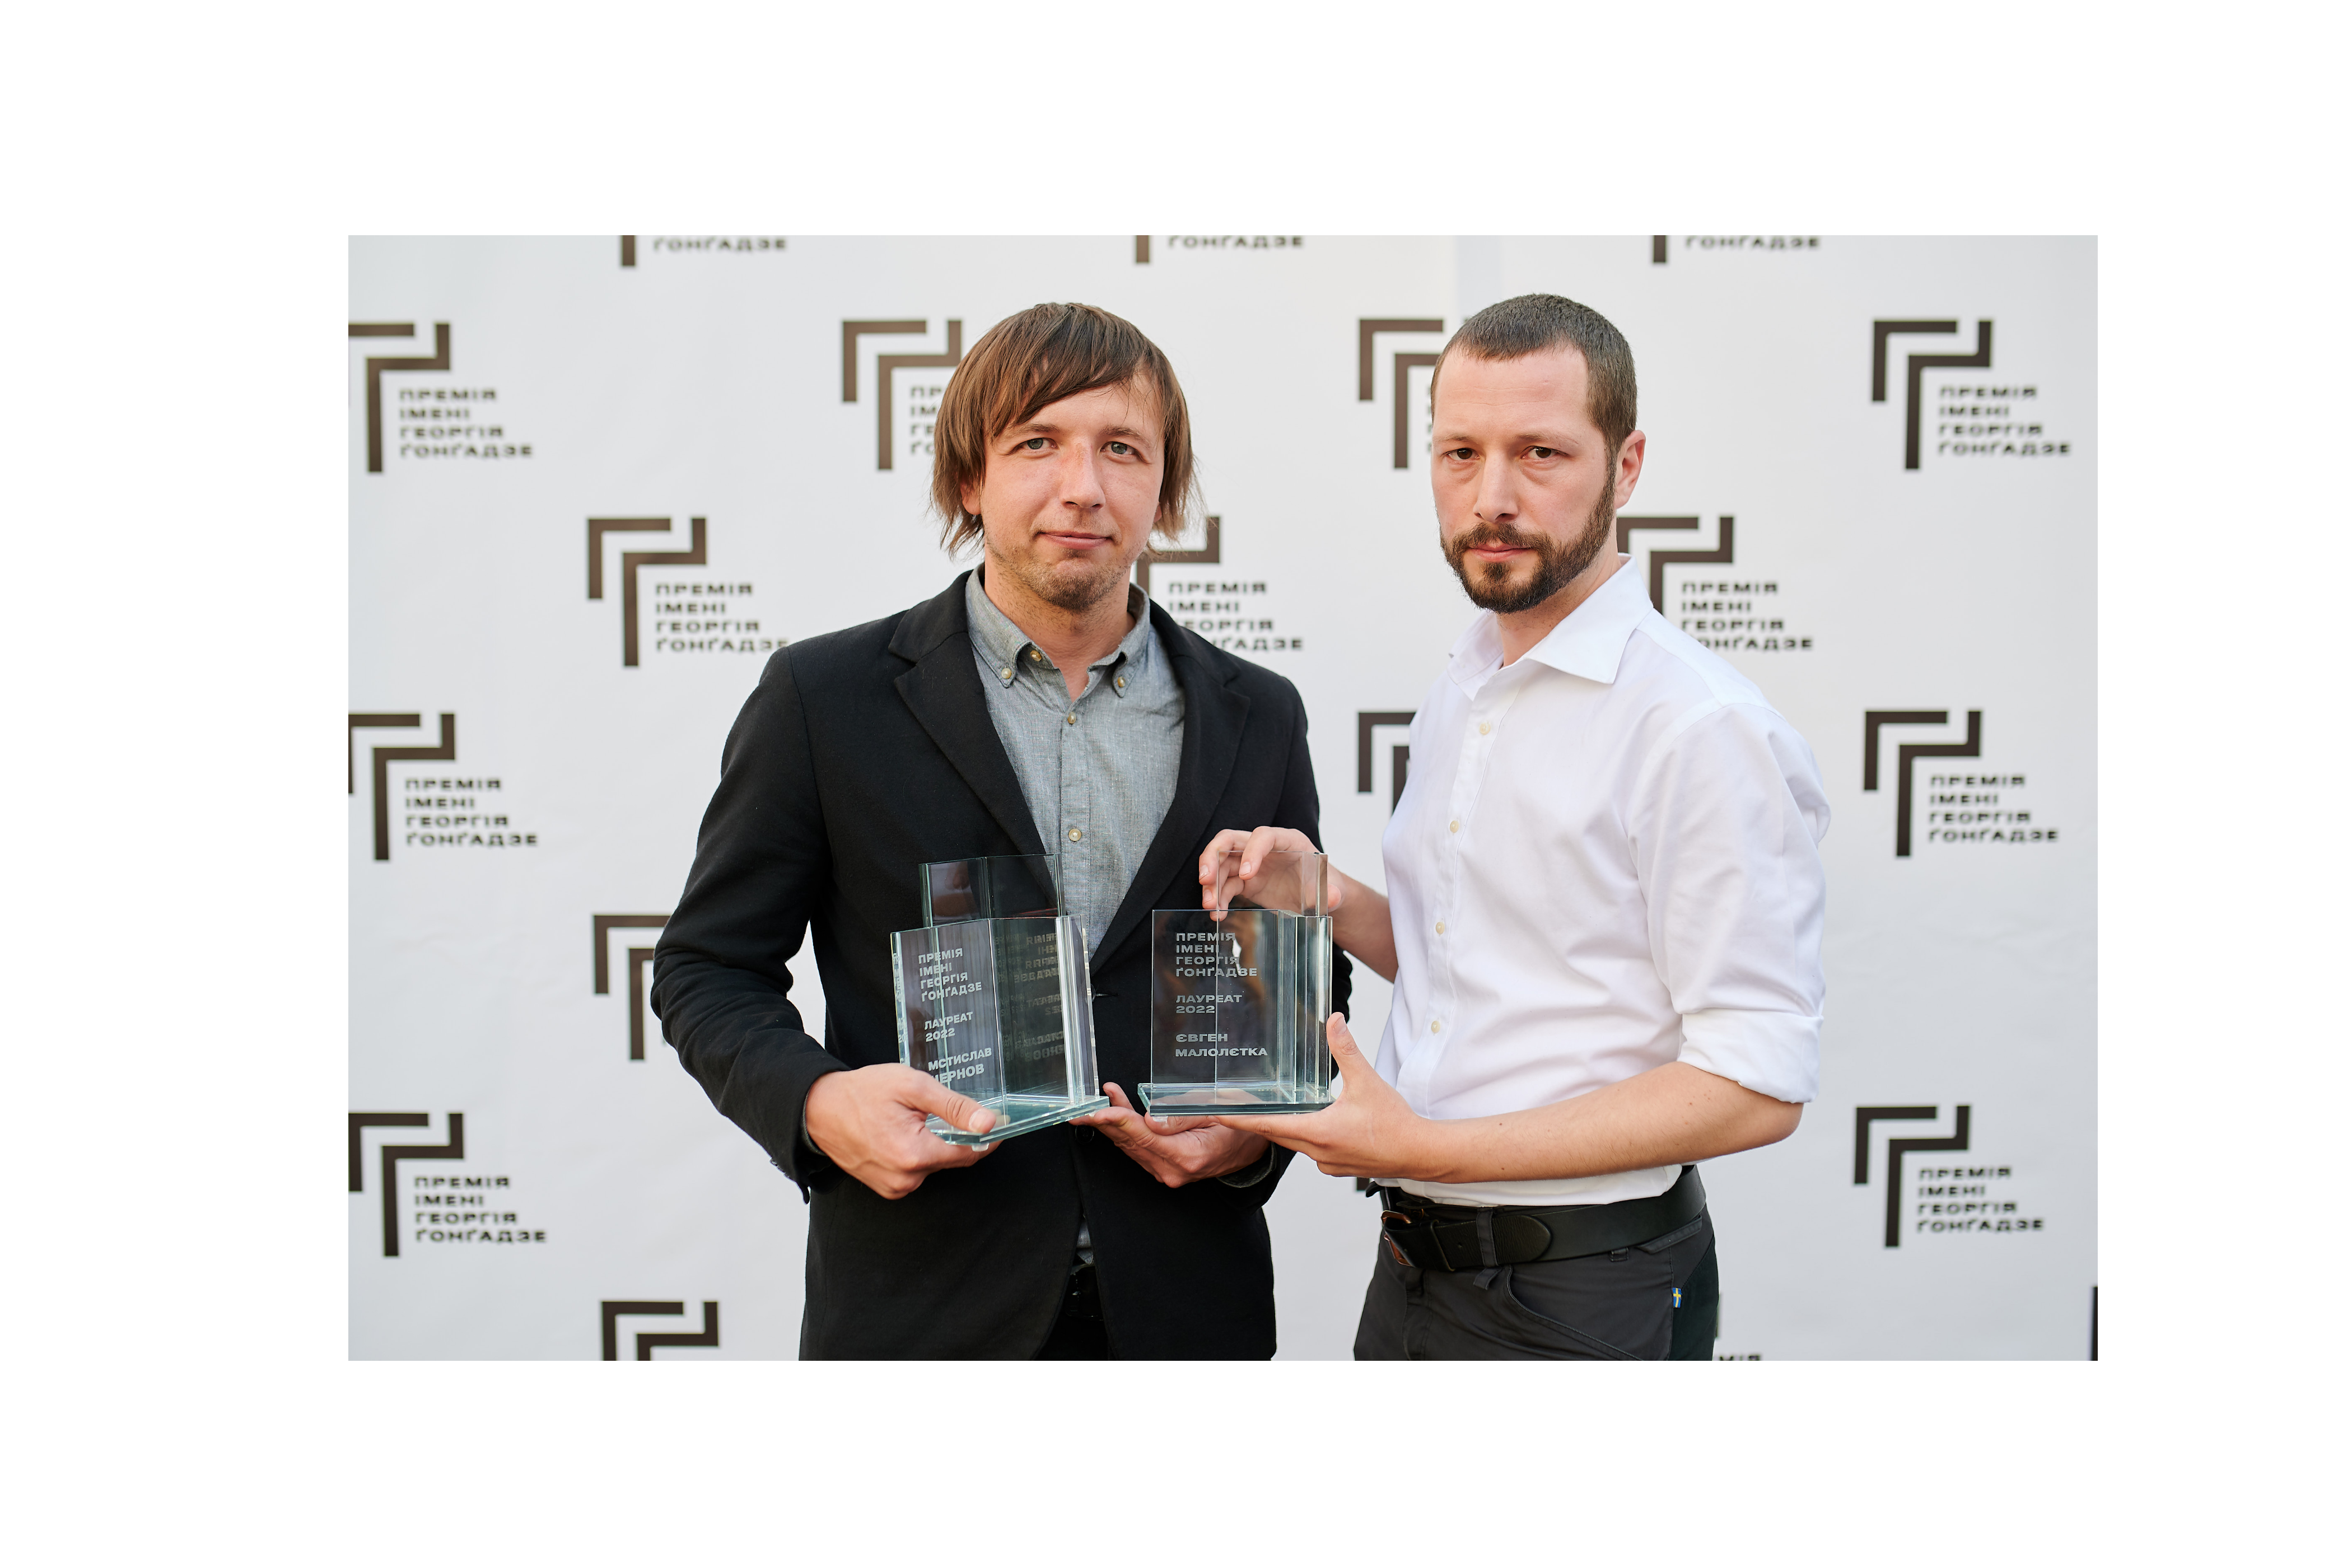 Mstislav Chernov and Yevhen Maloletka became the winners of the Gongadze Prize-2022